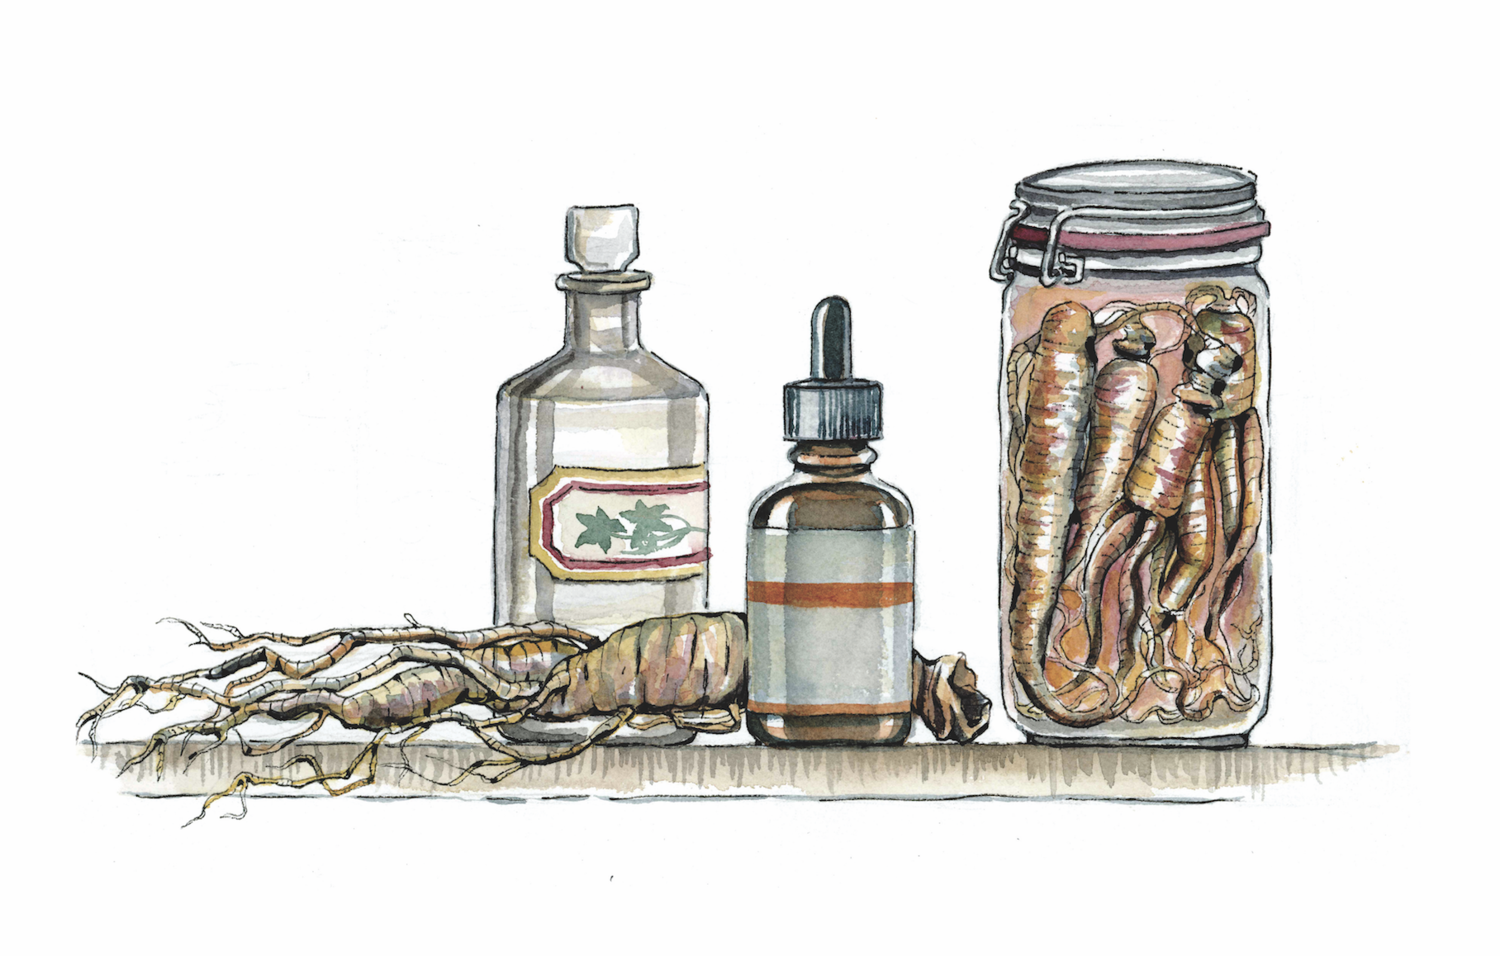 A collection of preserved ginseng roots and tinctures to show the medicinal uses of ginseng across time and cultures.